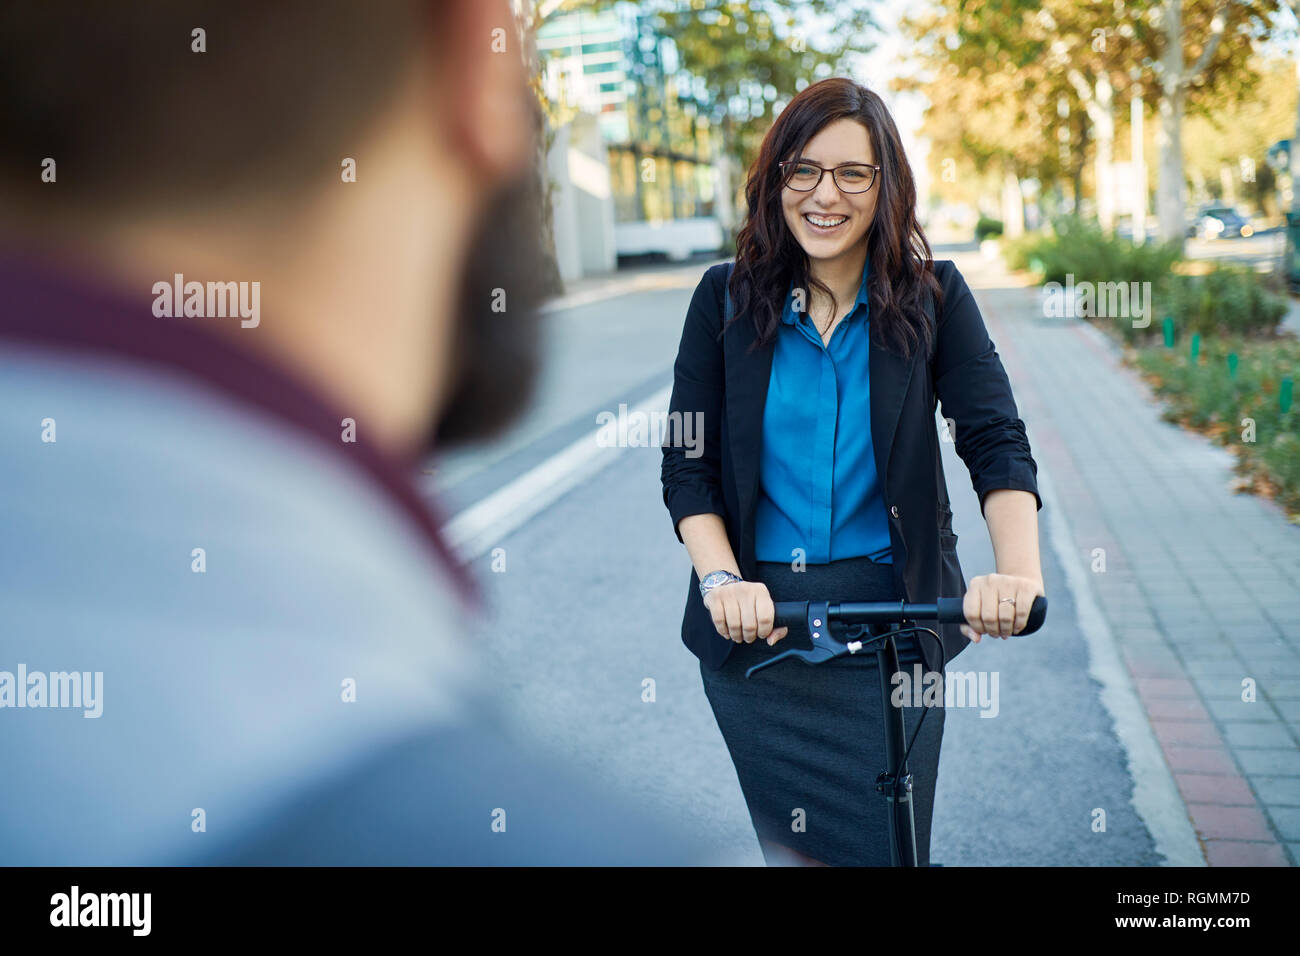 Smling businesswoman with scooter meeting businessman Banque D'Images